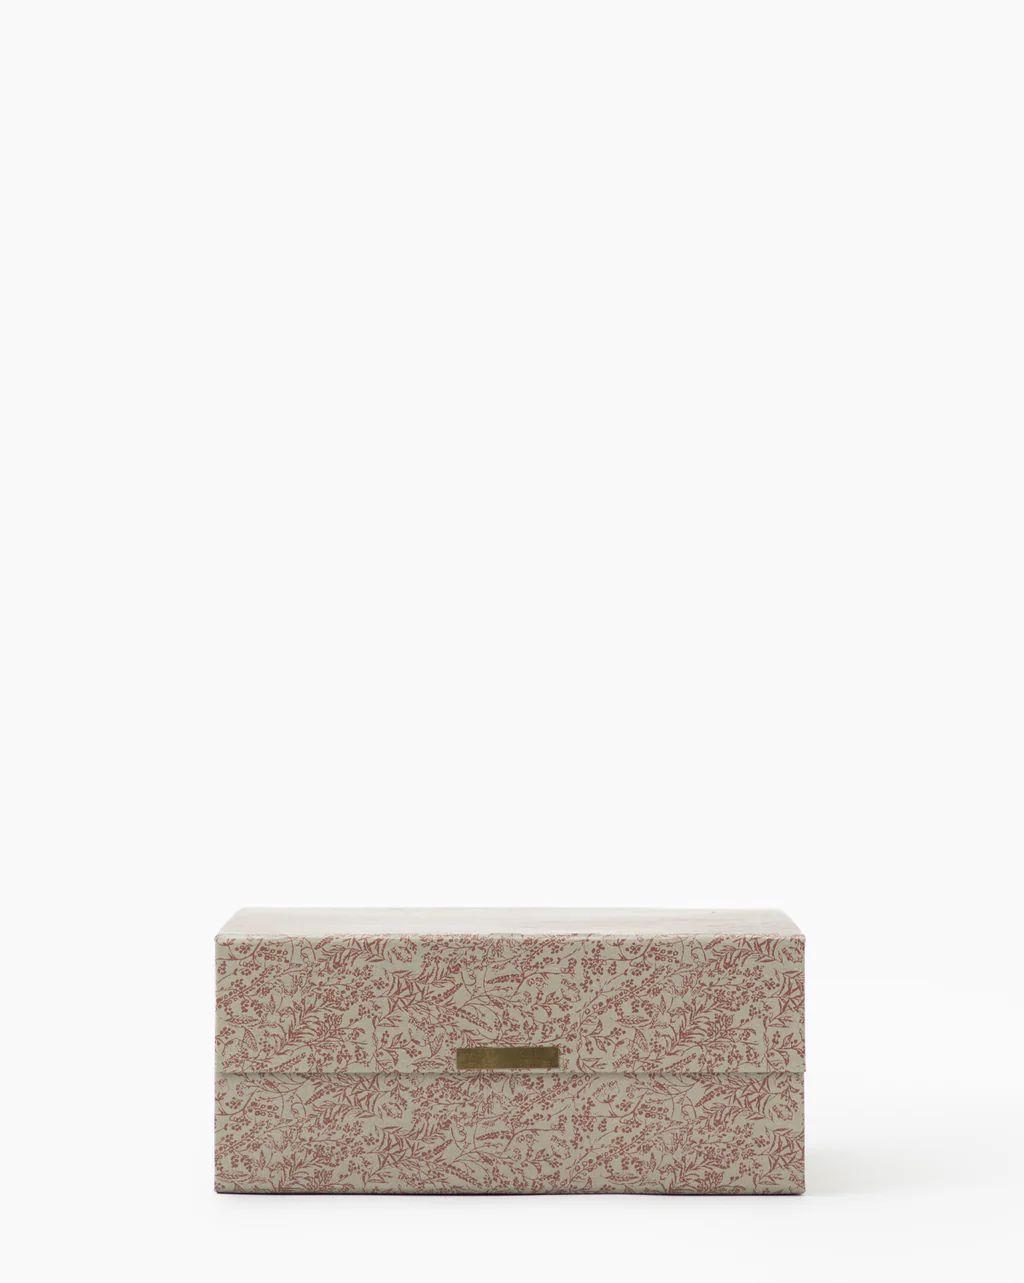 Gray Floral Storage Box | McGee & Co.